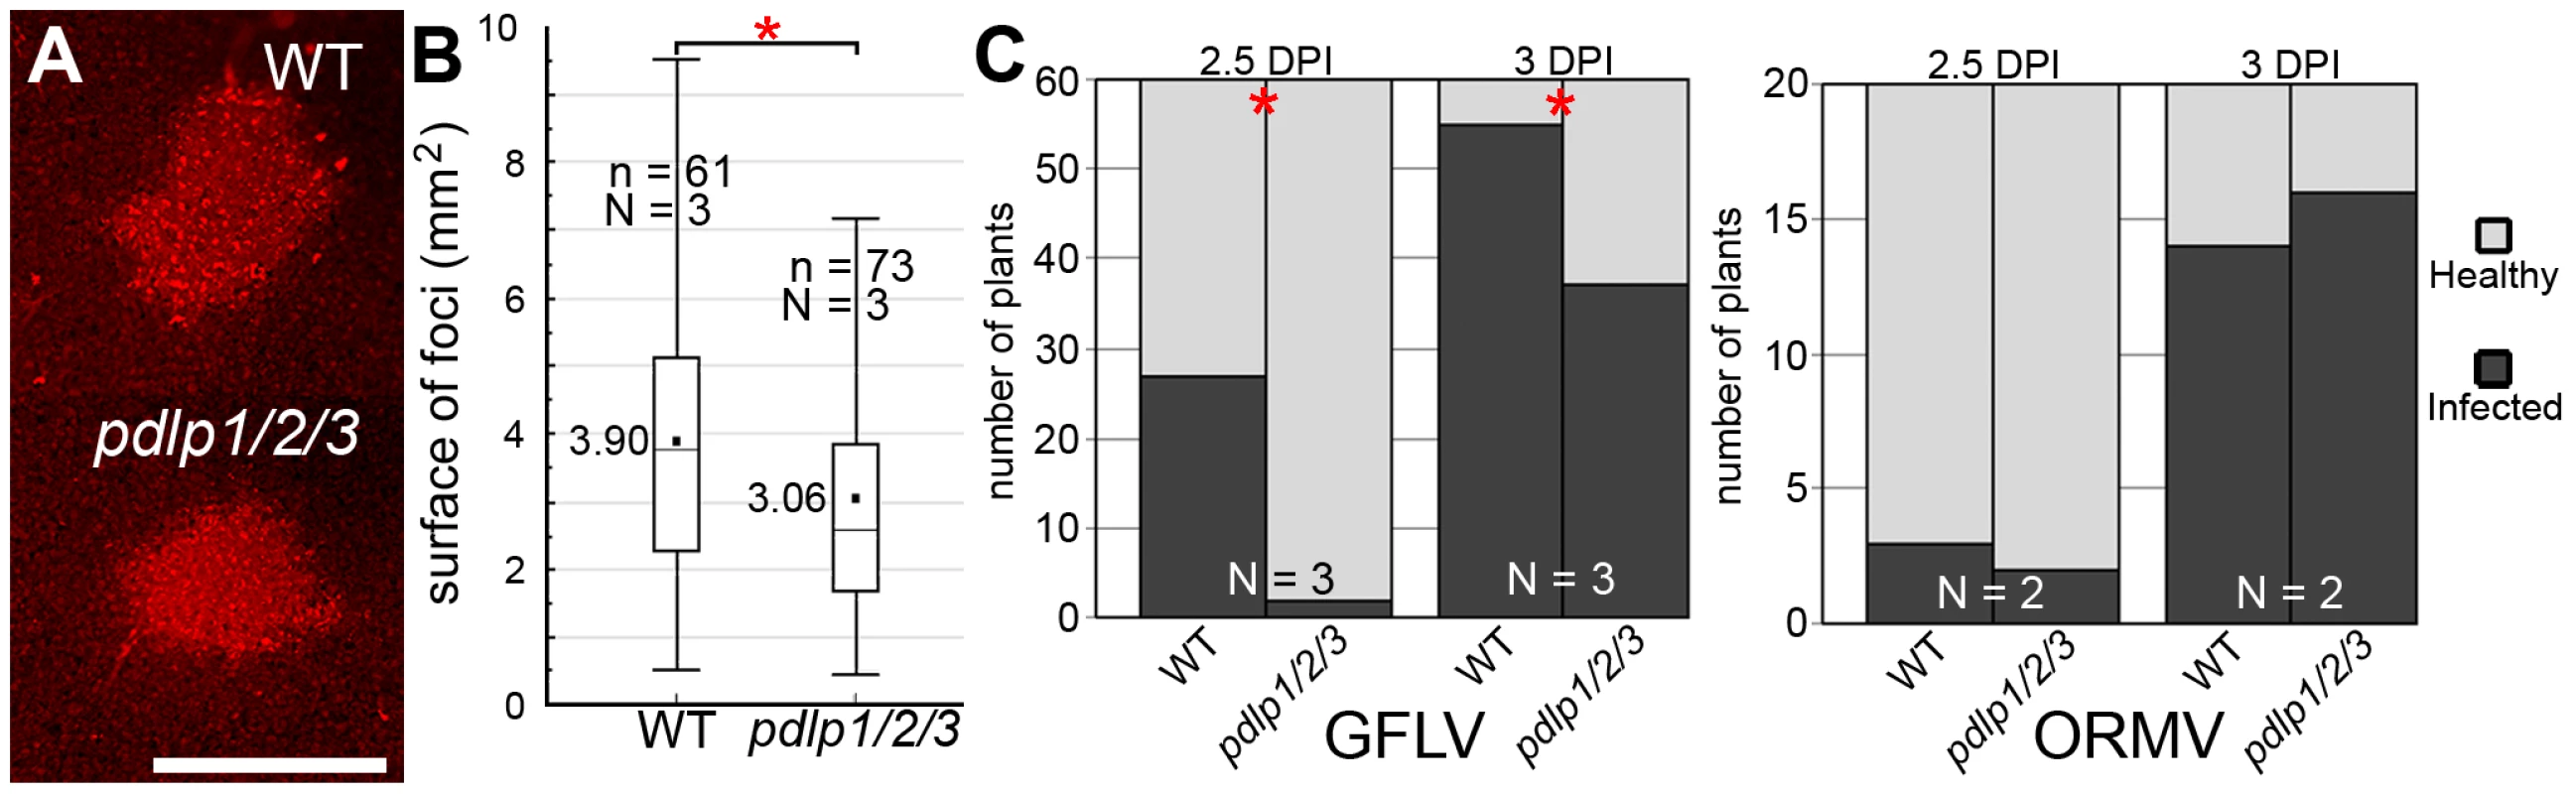 GFLV cell-to-cell and long distance movement is altered in <i>pdlp1/2/3</i> mutants.